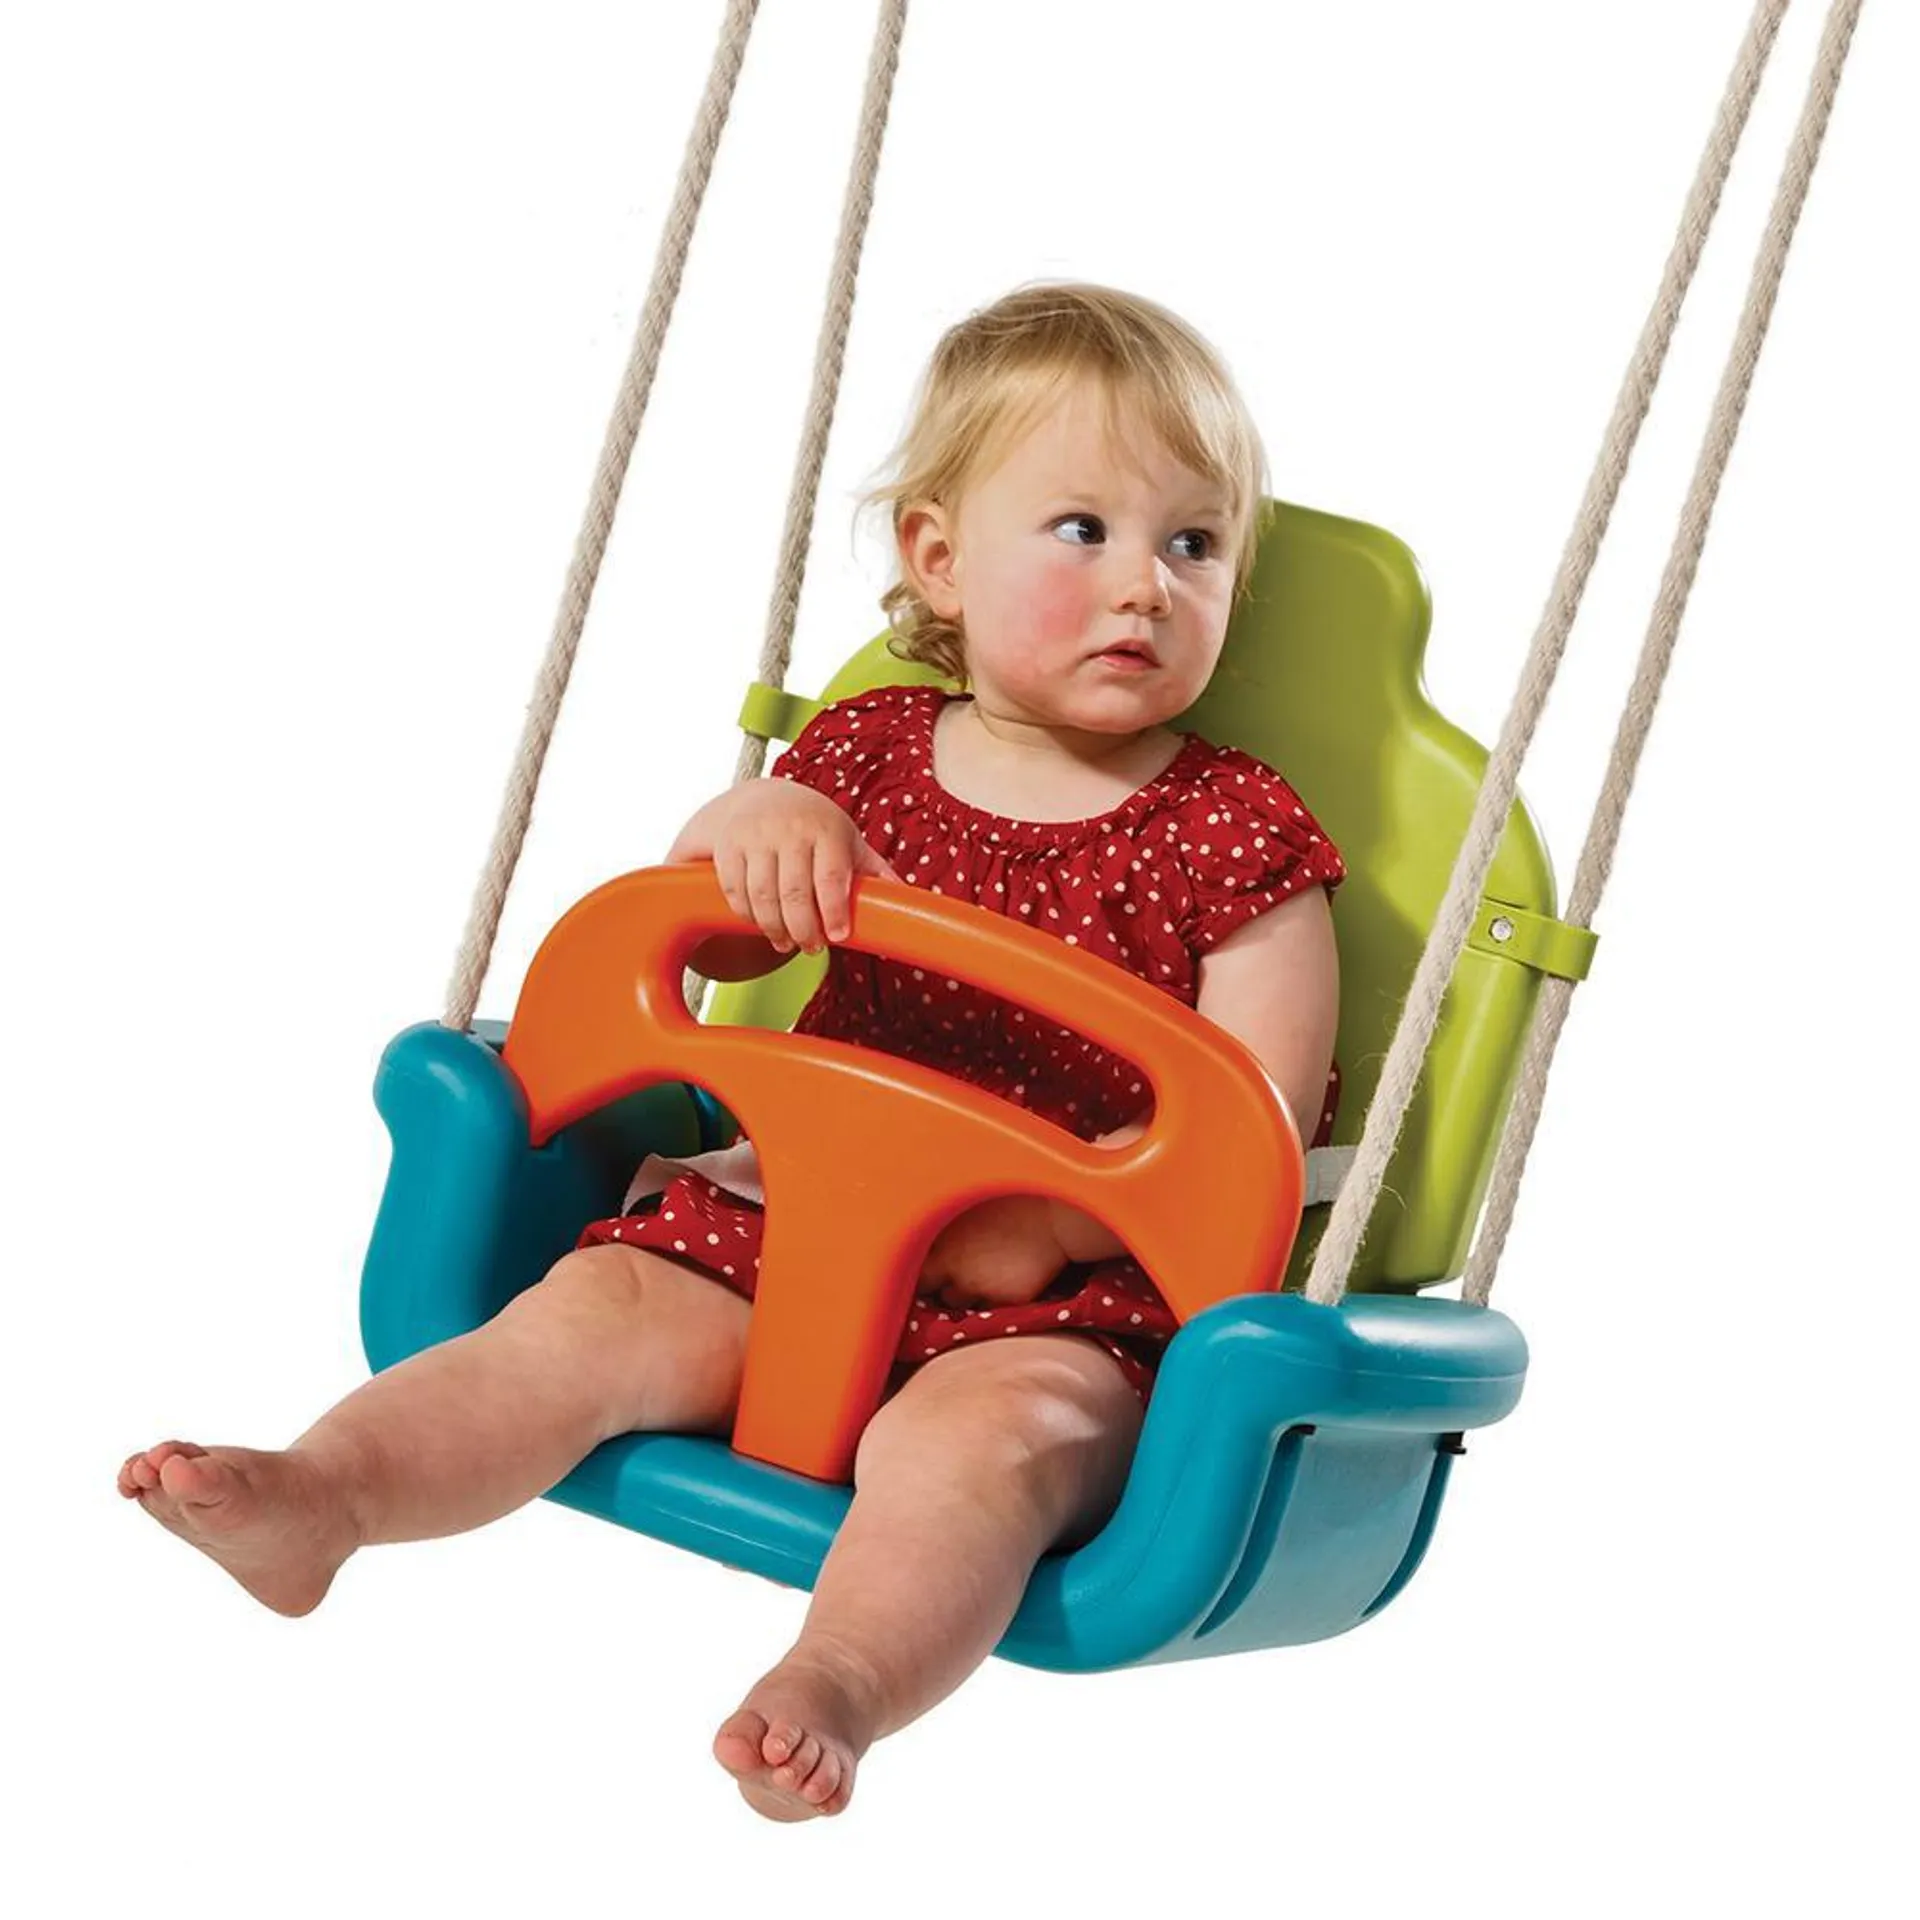 KBT Baby Seat GrowableType with Poly Propolyne ropes